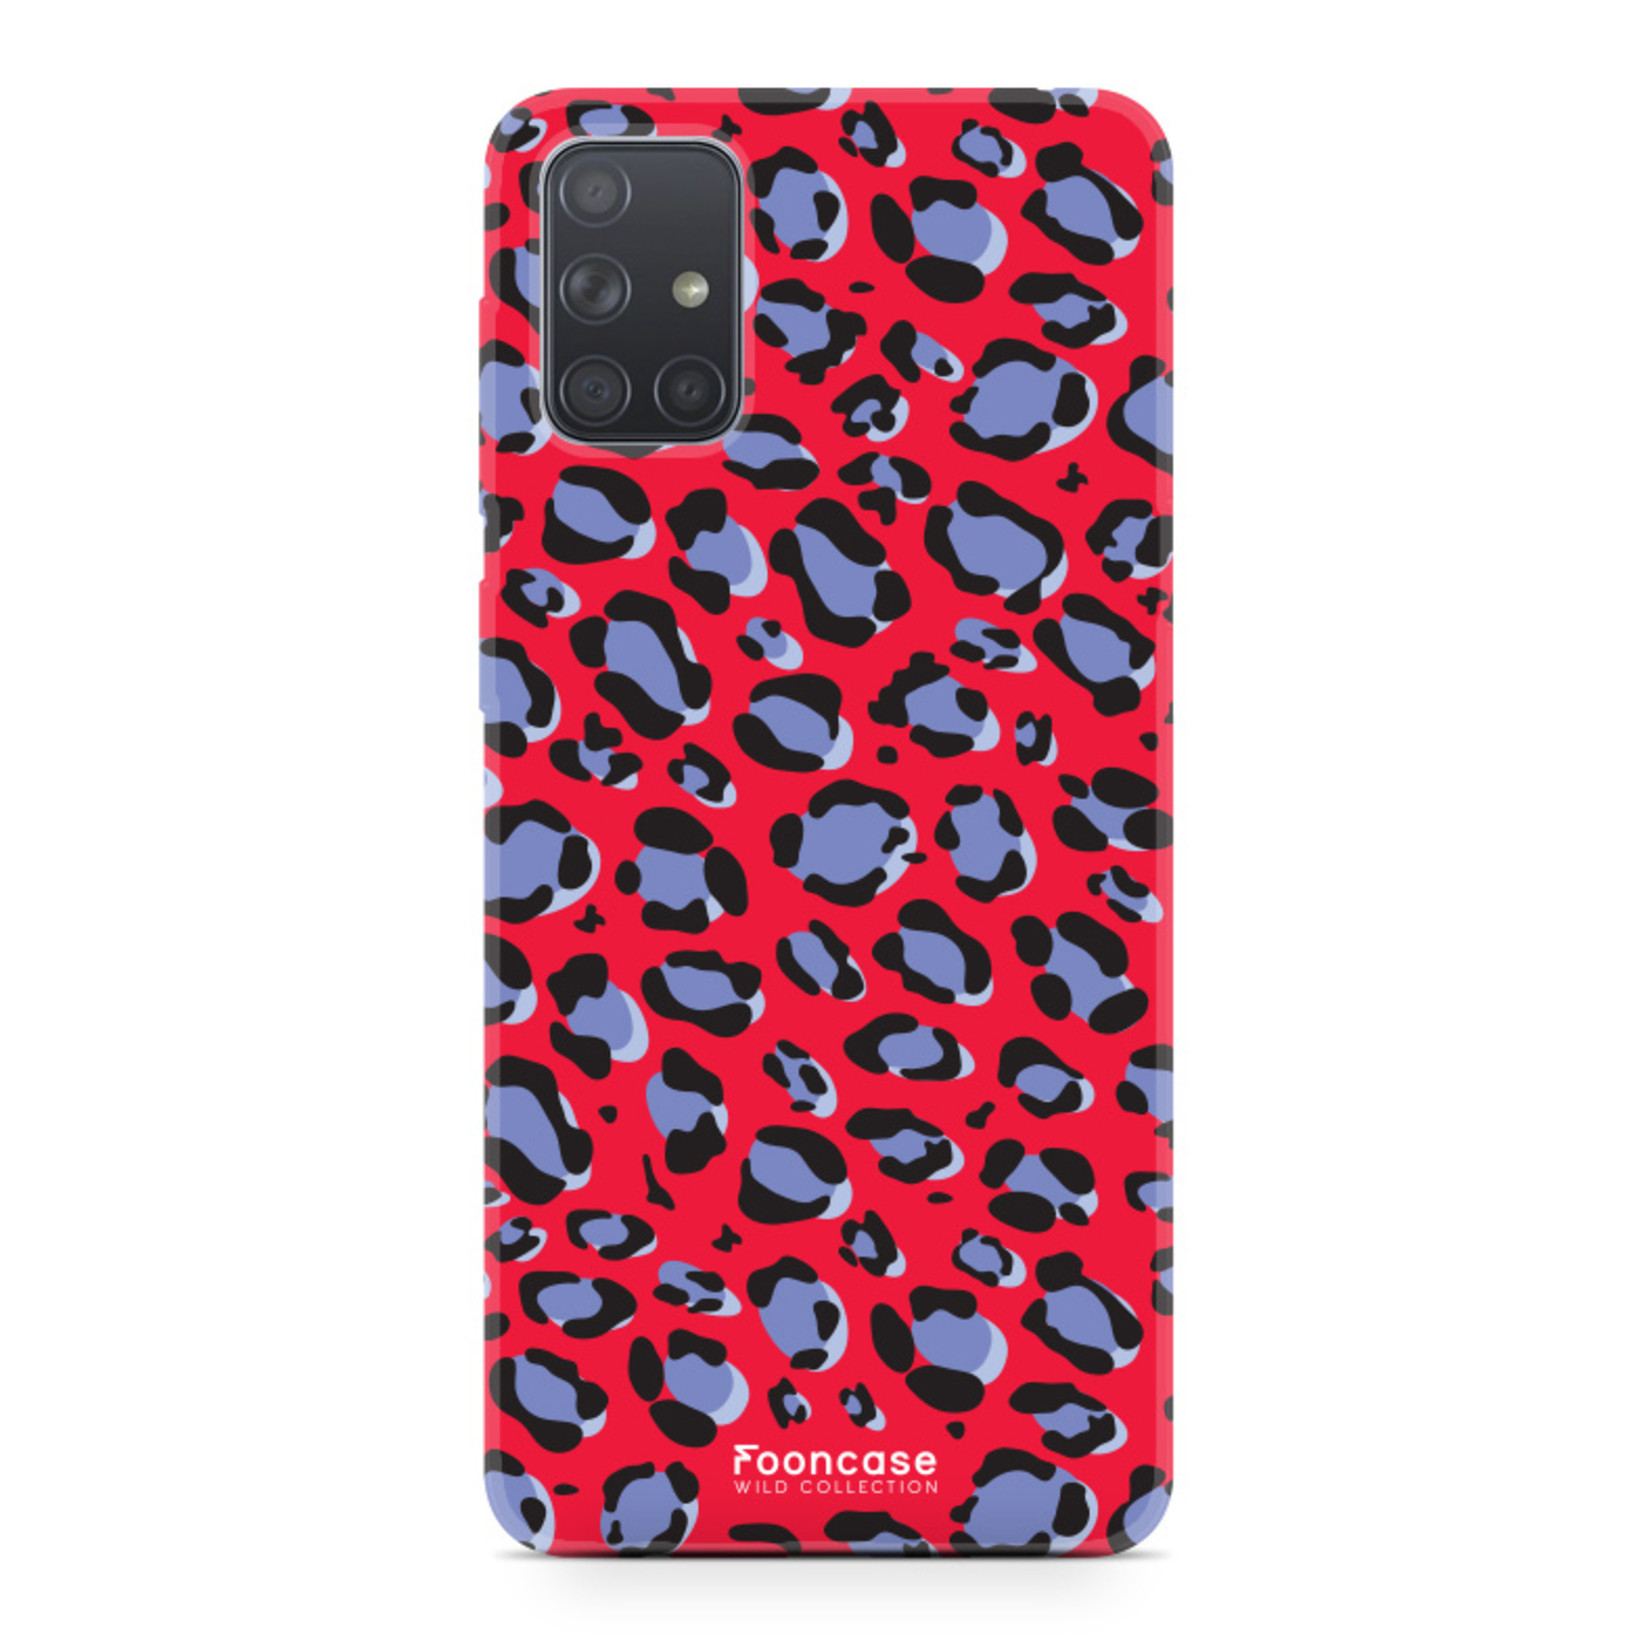 Samsung Galaxy A51 - WILD COLLECTION / Red